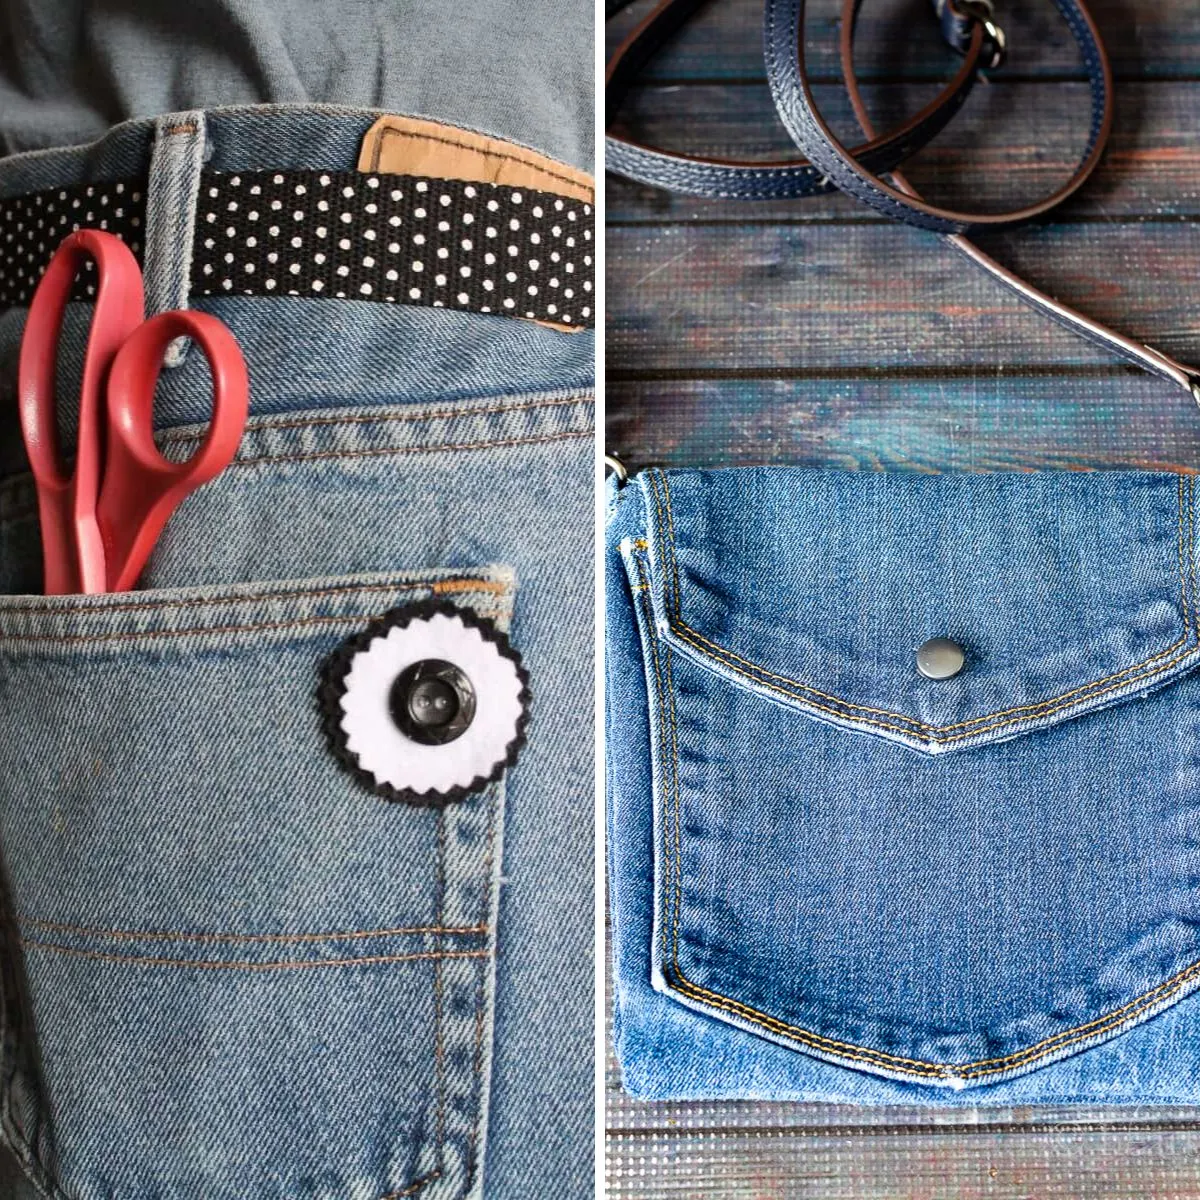 Learn how to repurpose old jeans